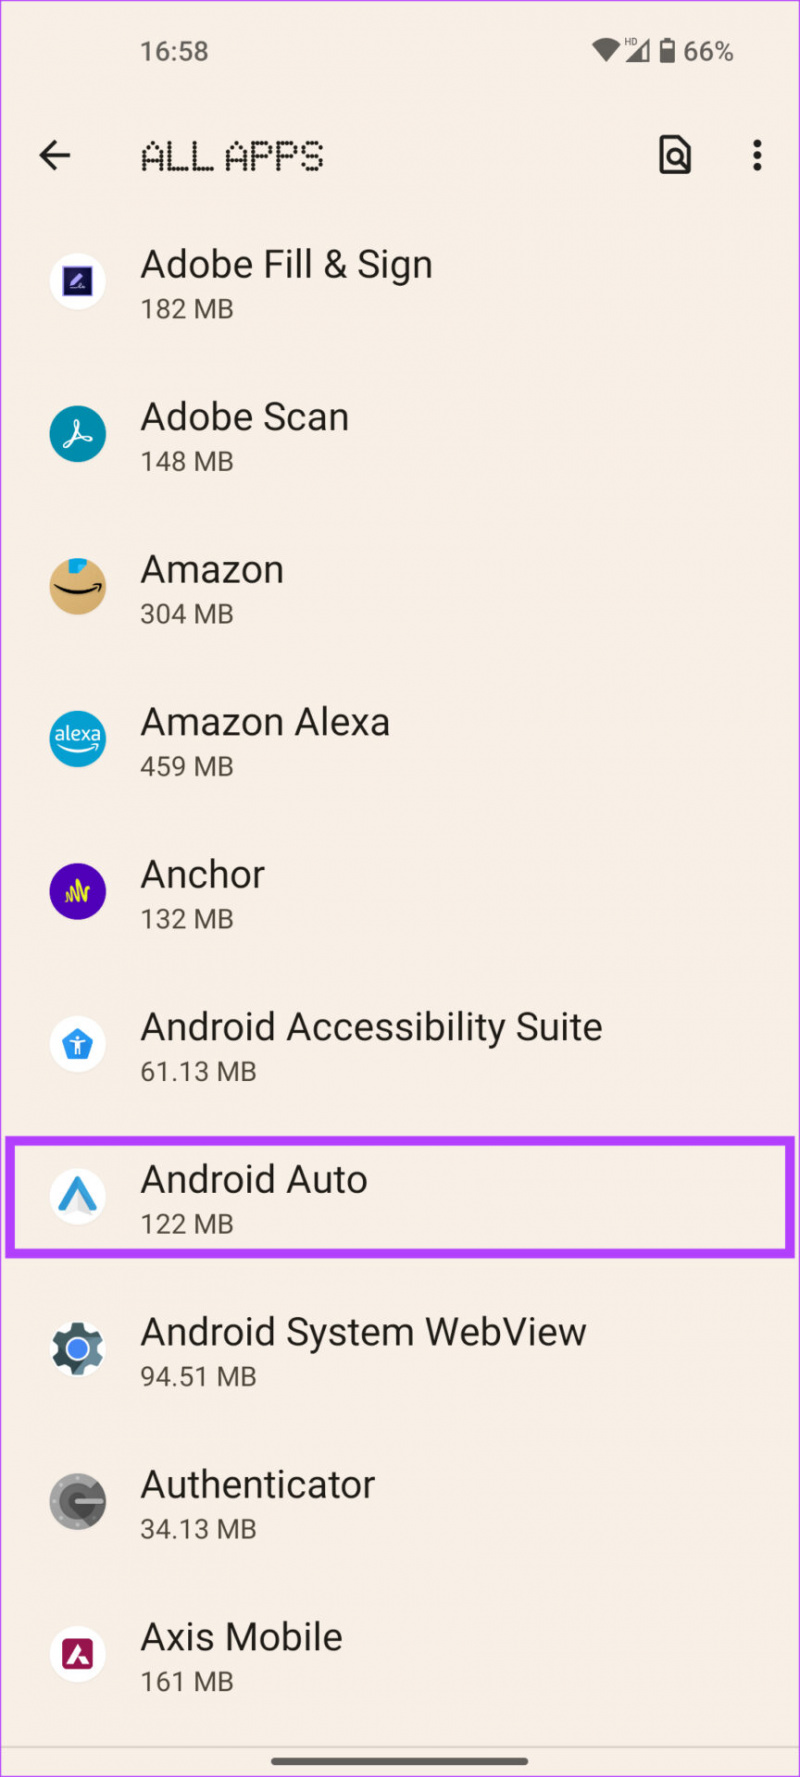   Android Auto